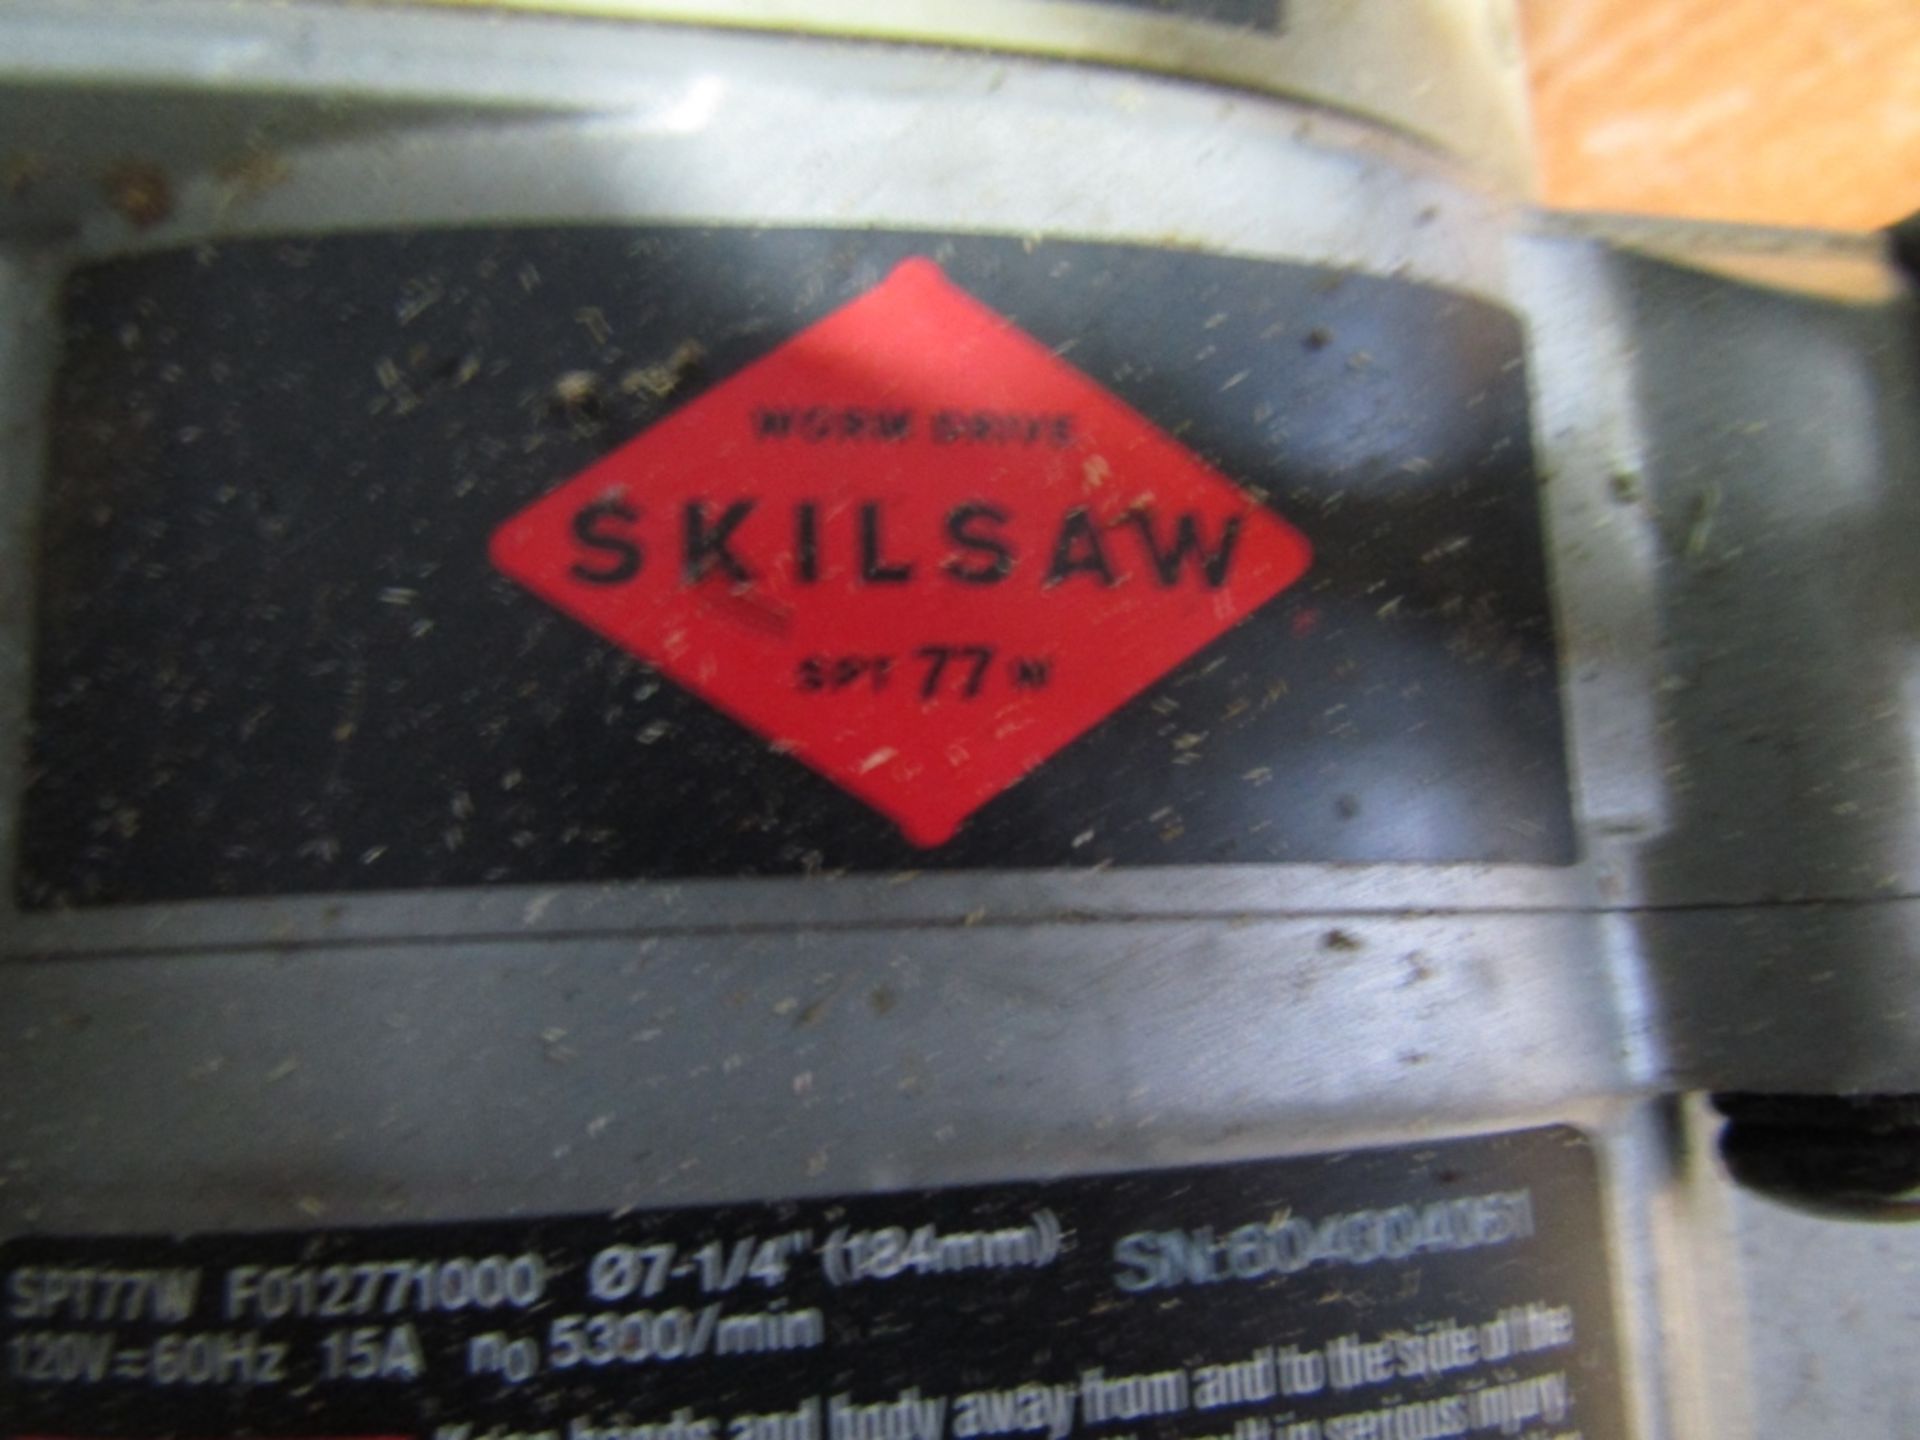 Skilsaw, Worm Drive SPT77W, Located in Mt. Pleasant, IA - Image 3 of 4